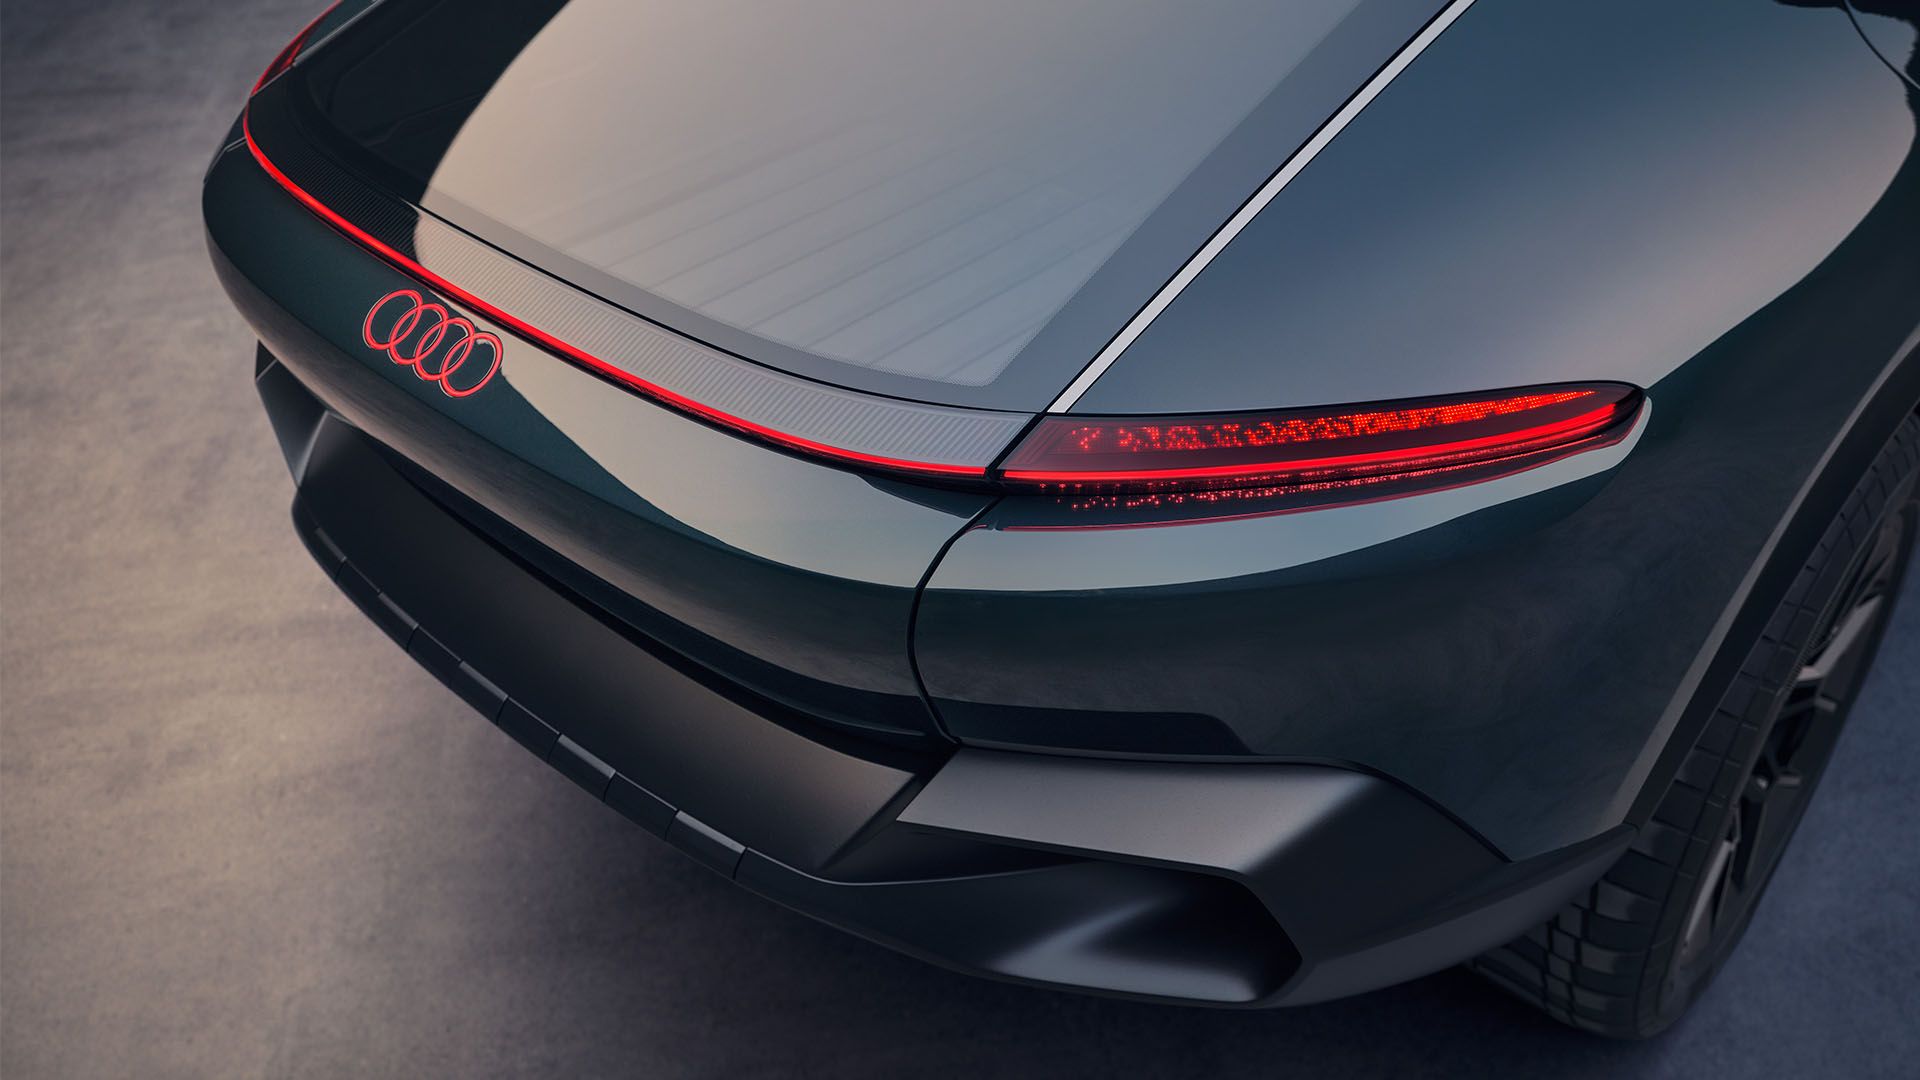 Rear view of the Audi activesphere concept.